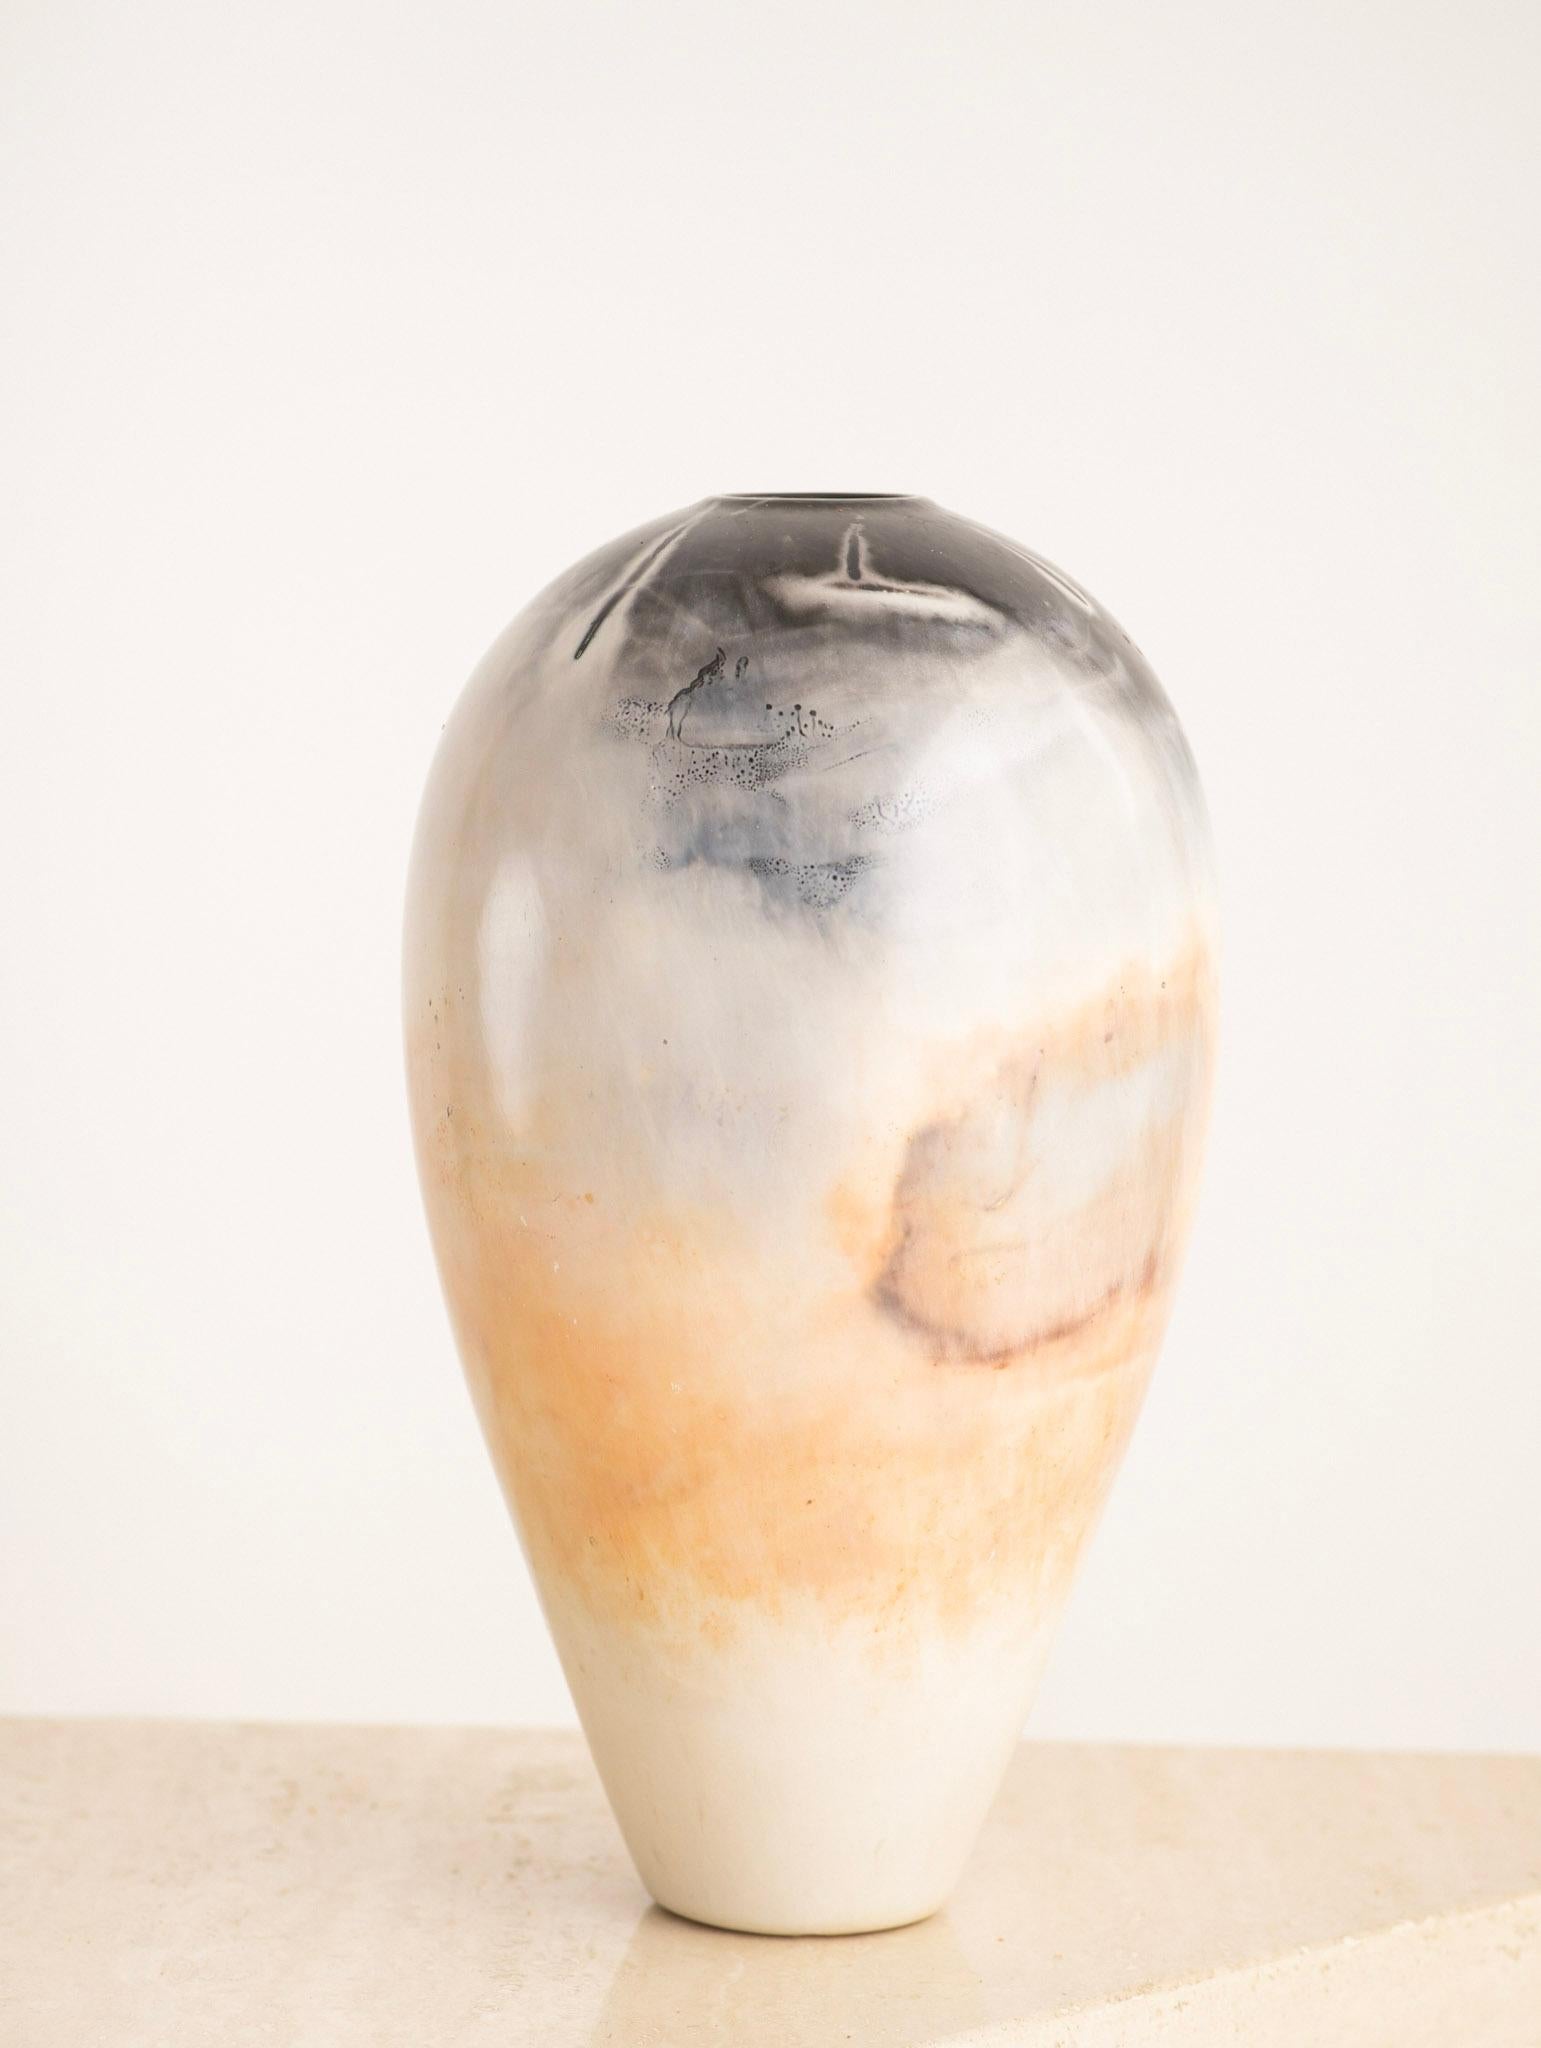 Elegant “burnished and saggar fired” porcelain vase by Massachusetts-based artist Scott Tubby. Beautiful painterly like abstract pattern achieved by chemical reactions during firing. Signed “Scott Tubby.”